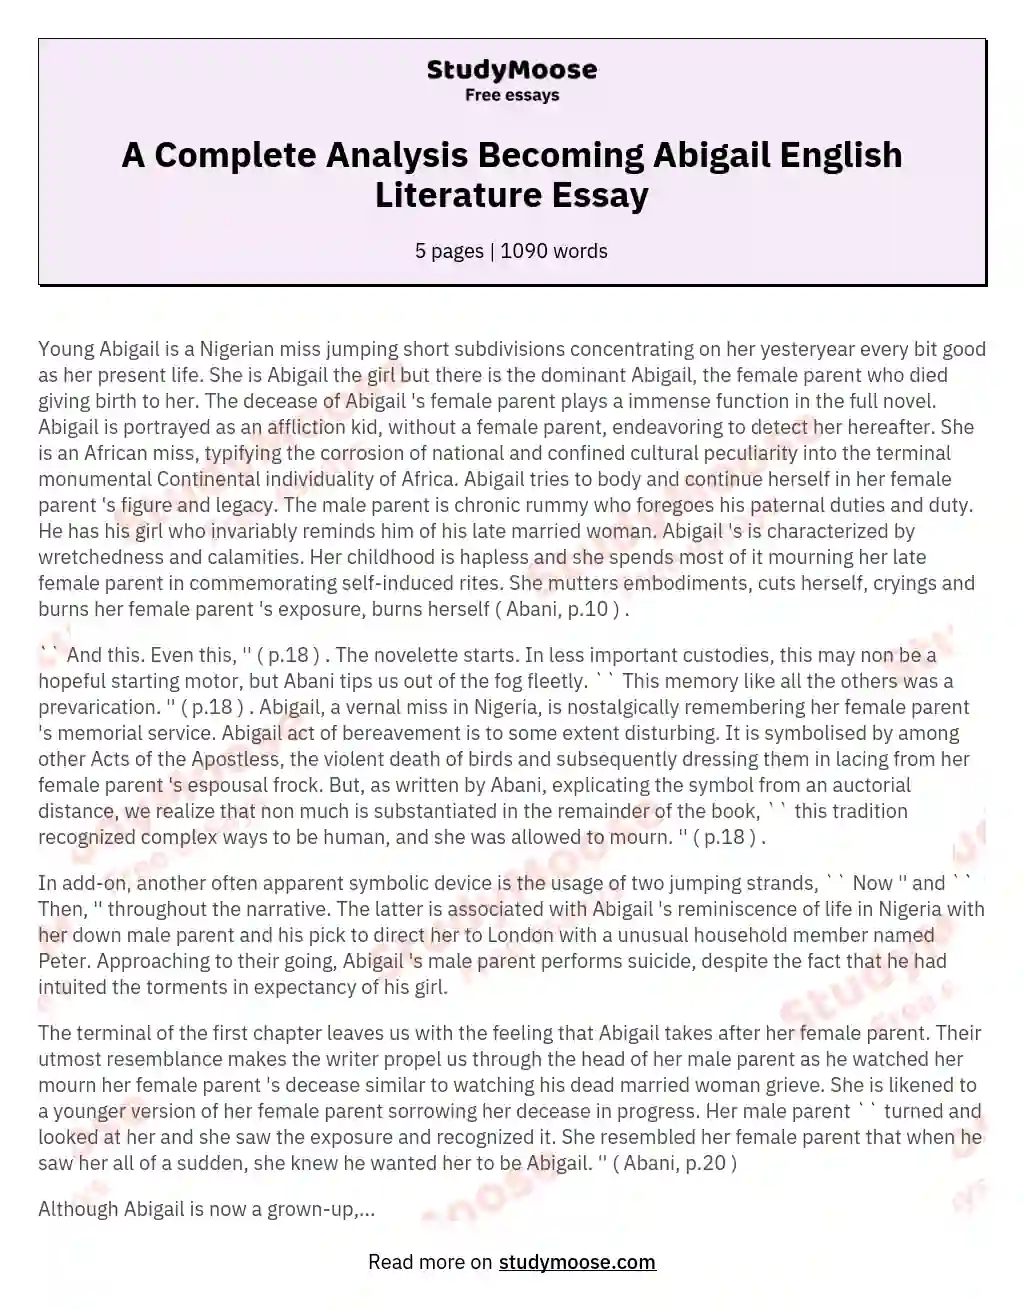 A Complete Analysis Becoming Abigail English Literature Essay